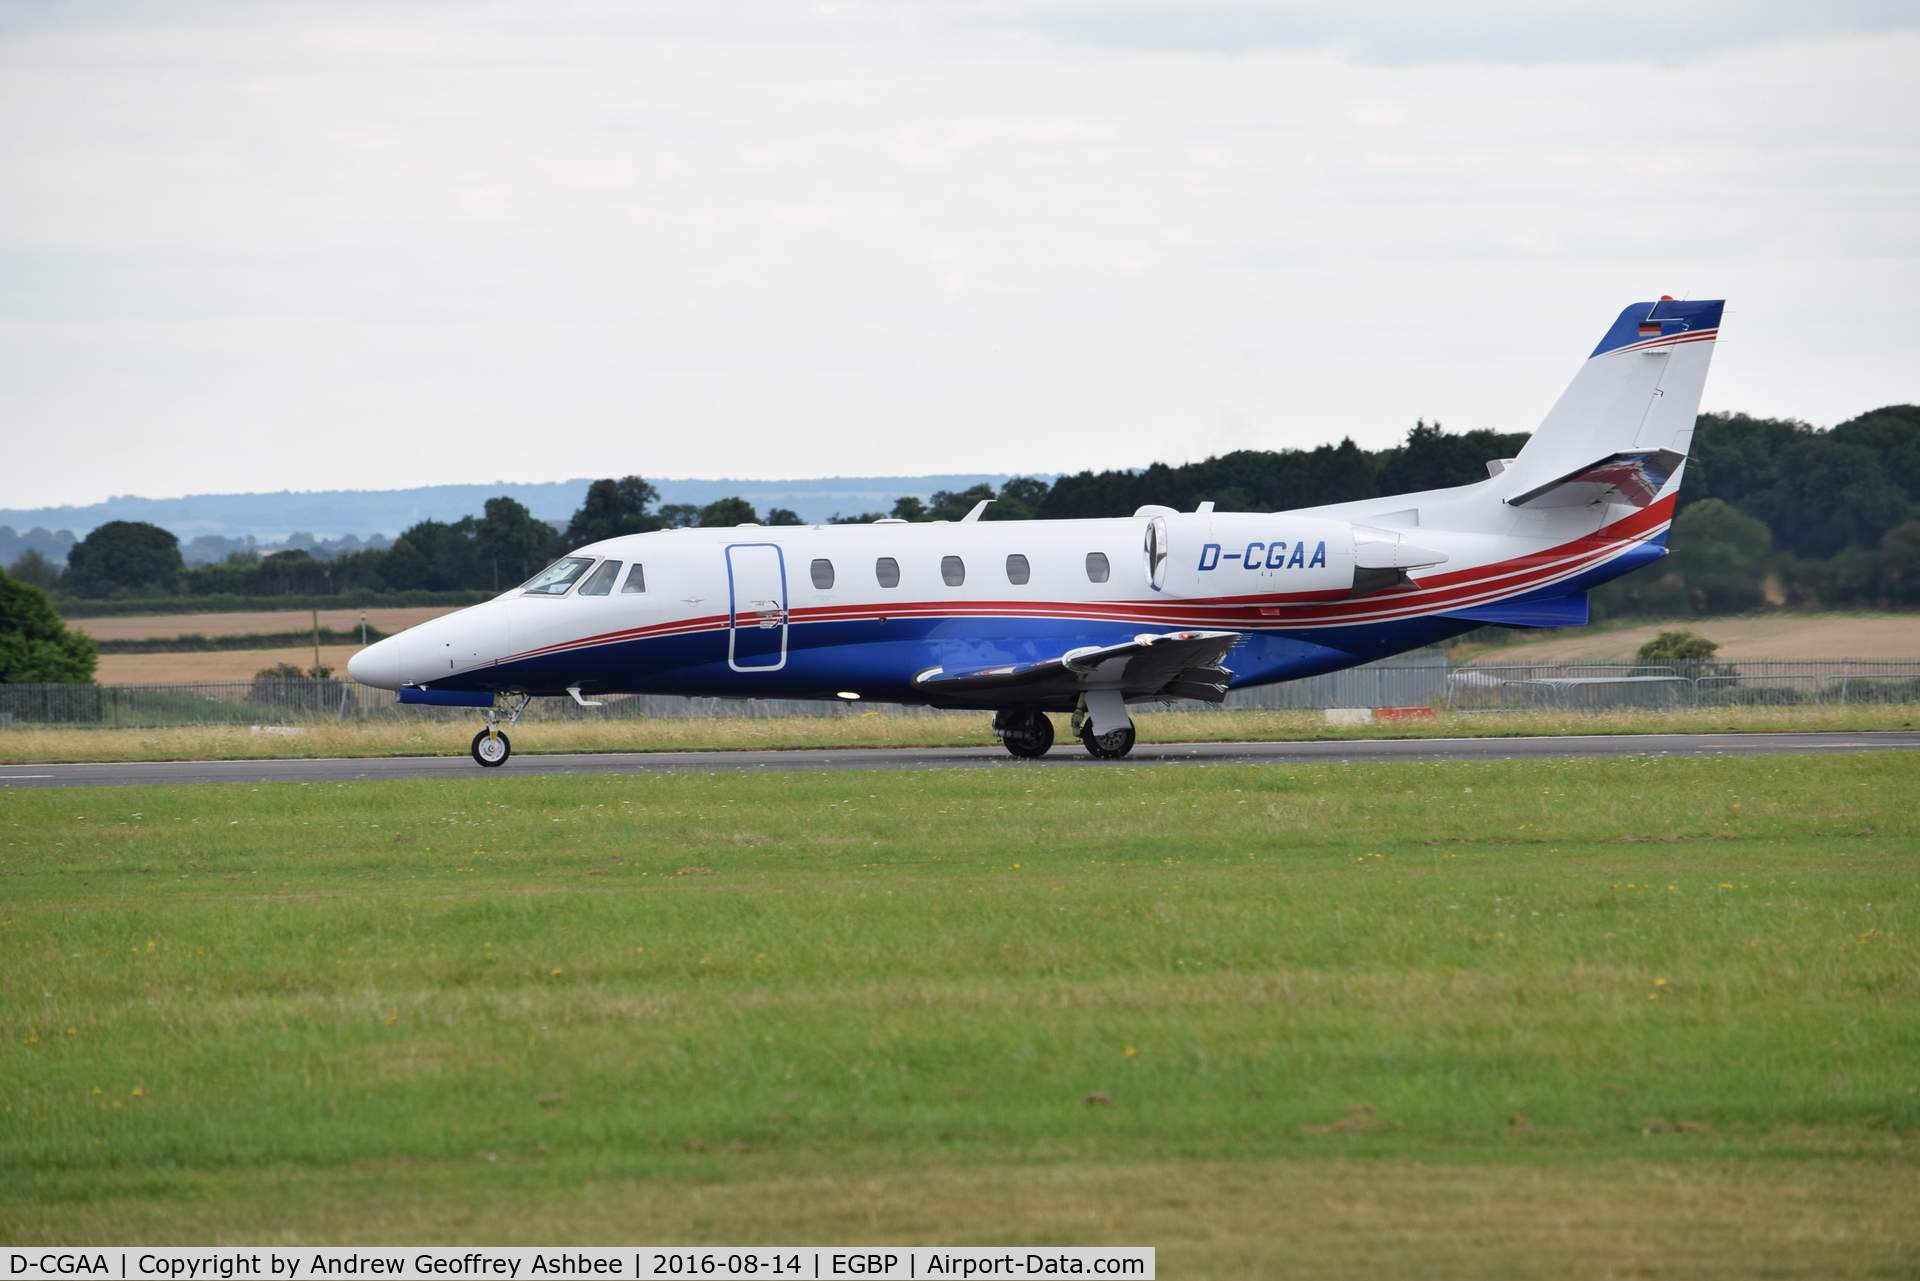 D-CGAA, 2014 Cessna 560 Citation Excel XLS+ C/N 560-6173, D-CGAA at Cotswold Airport.